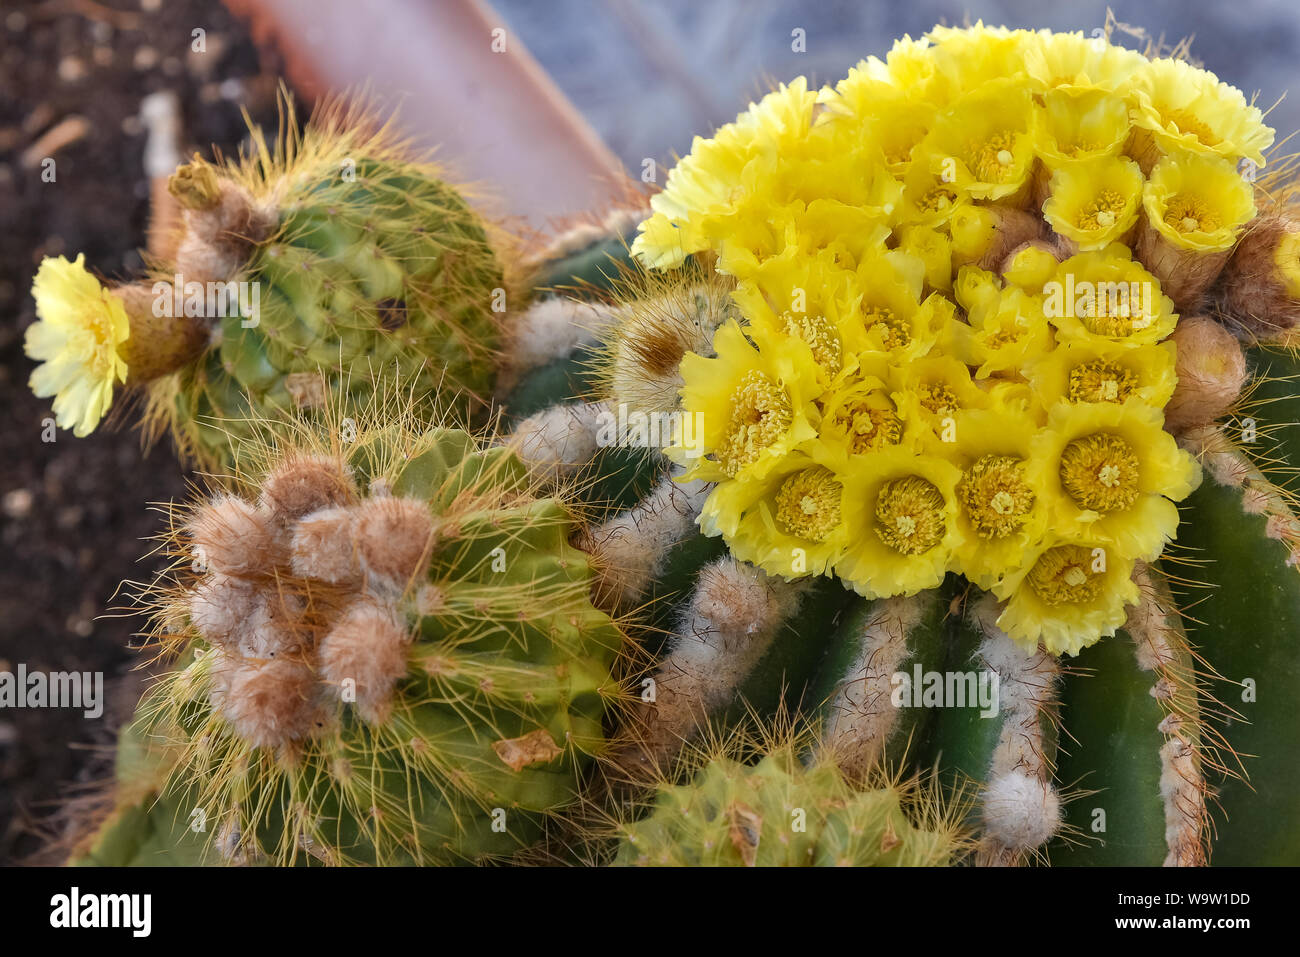 Selective focus, Cactus with beautiful yellow Round green cactus blooming with yellow flowers. Stock Photo